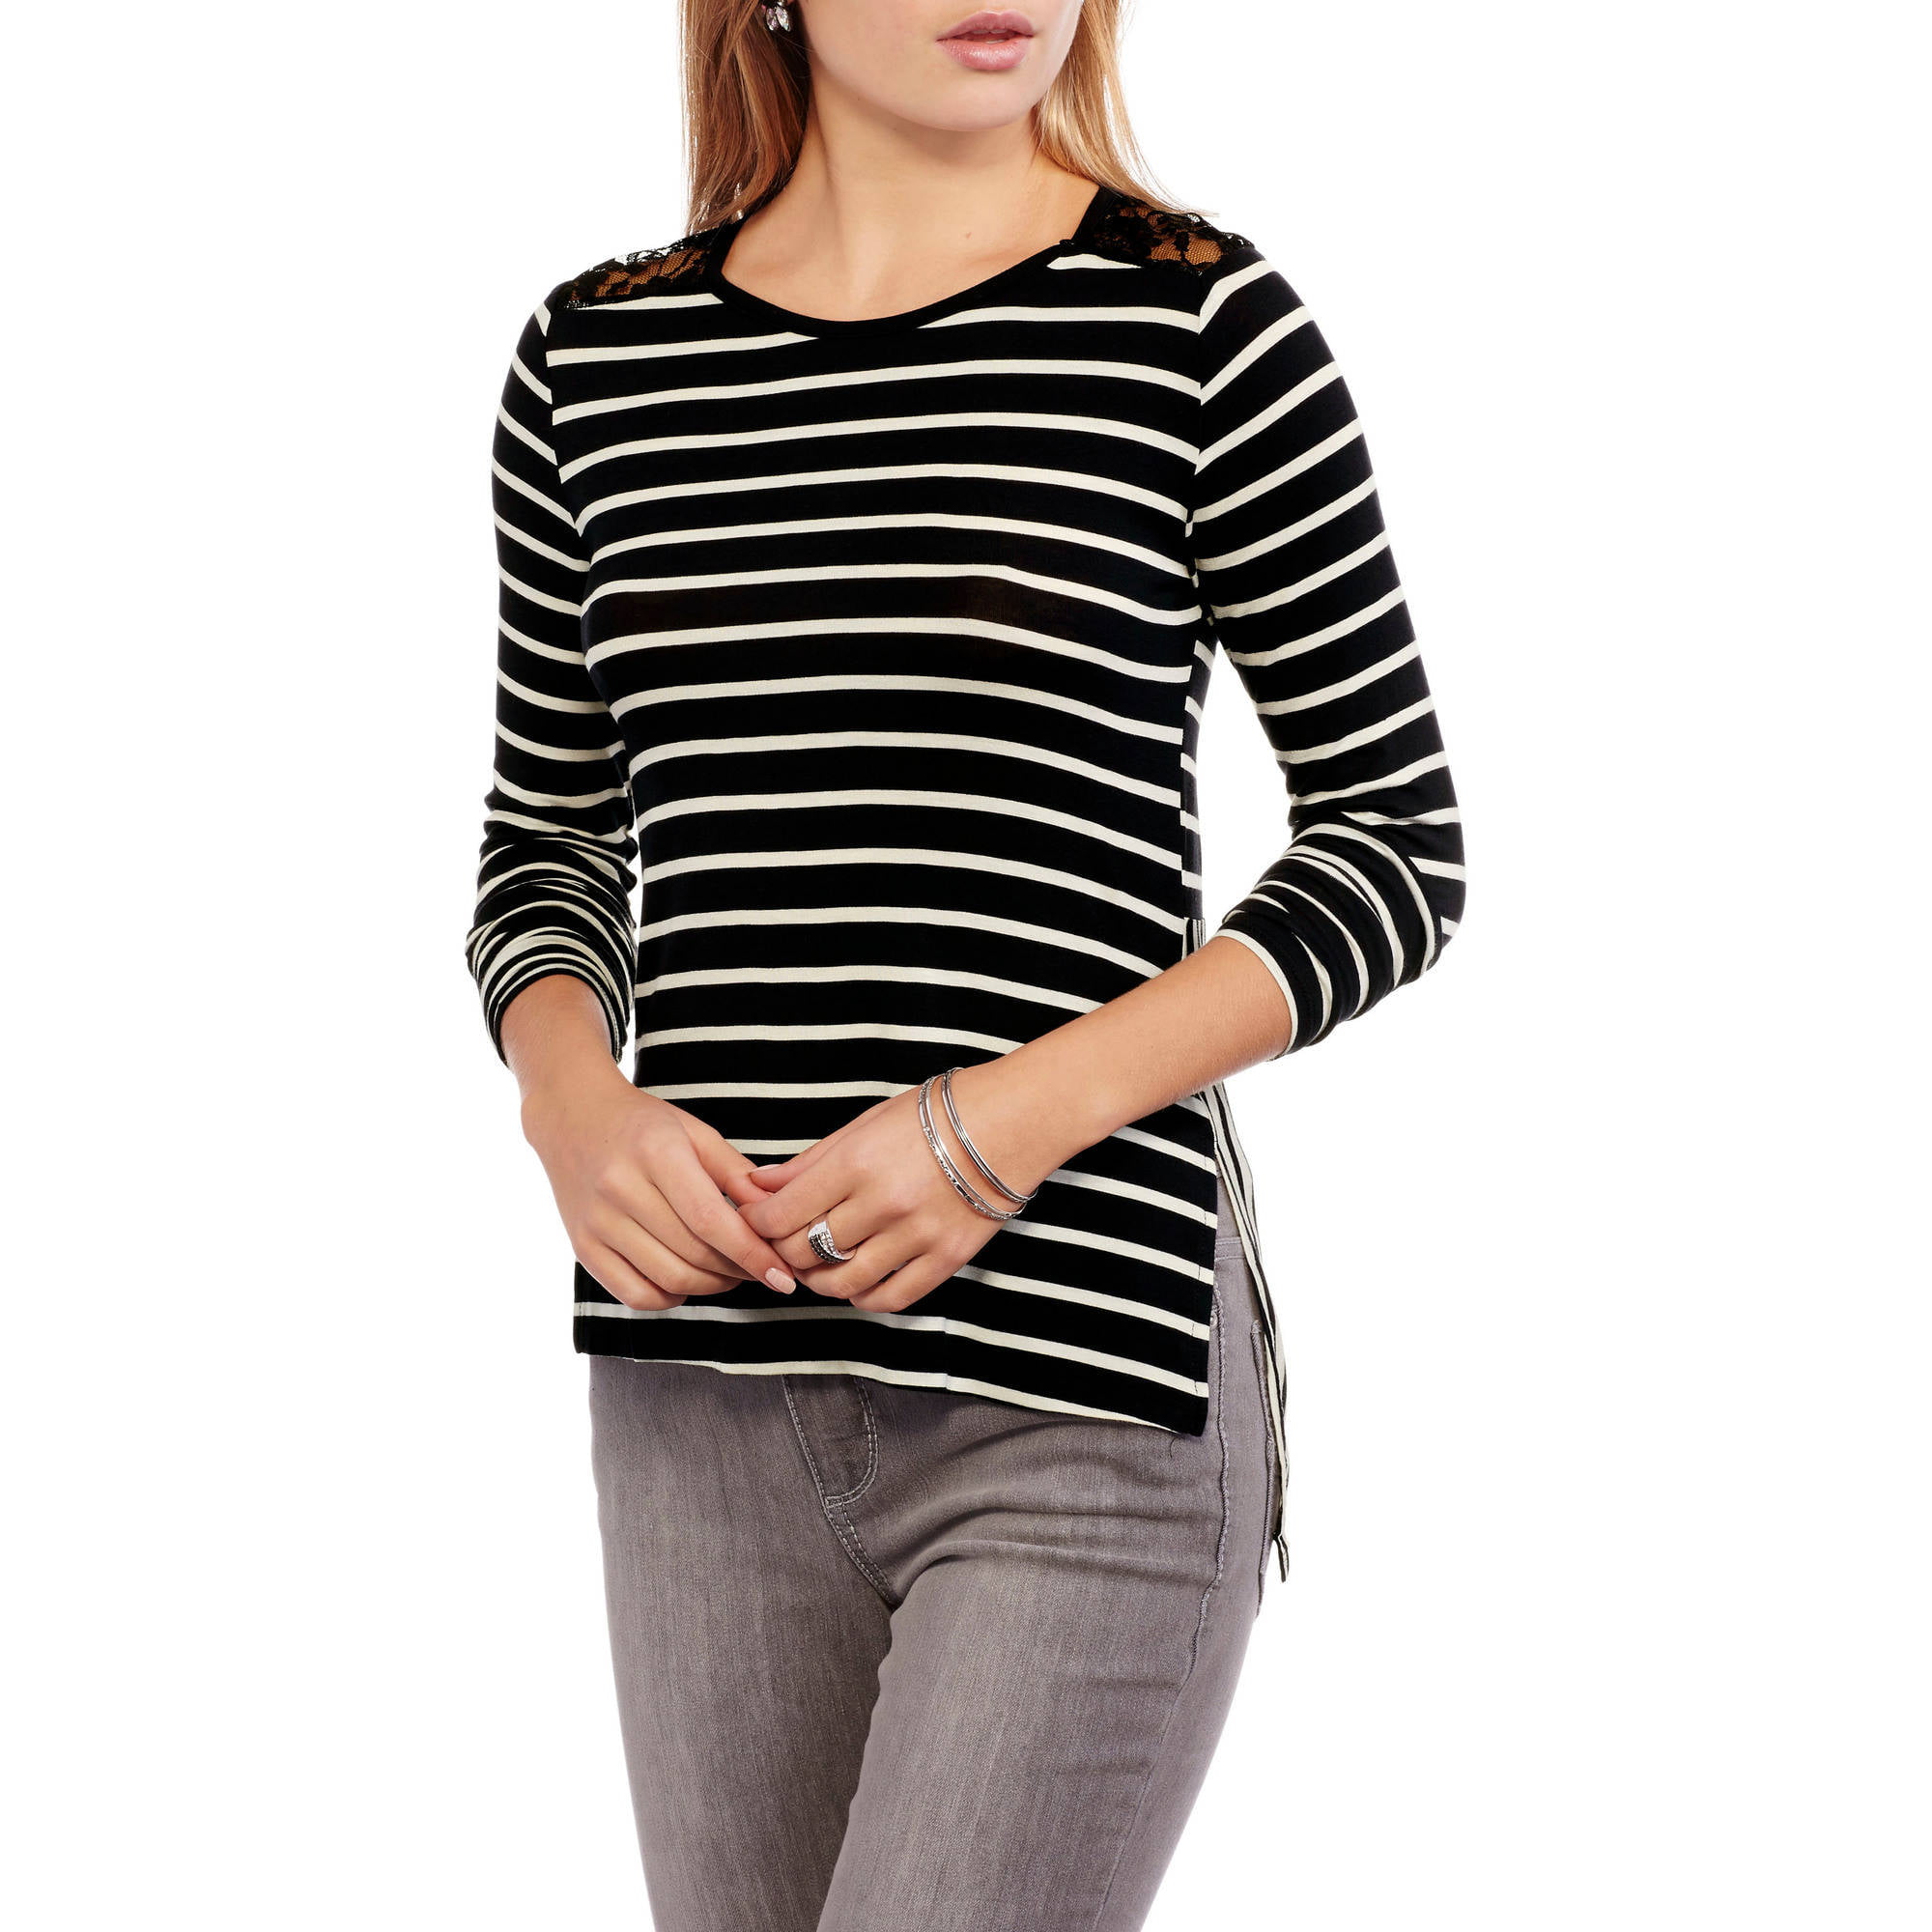 Juniors' Long Sleeve Top with Lace Insert and Mixed Stripes - Walmart.com